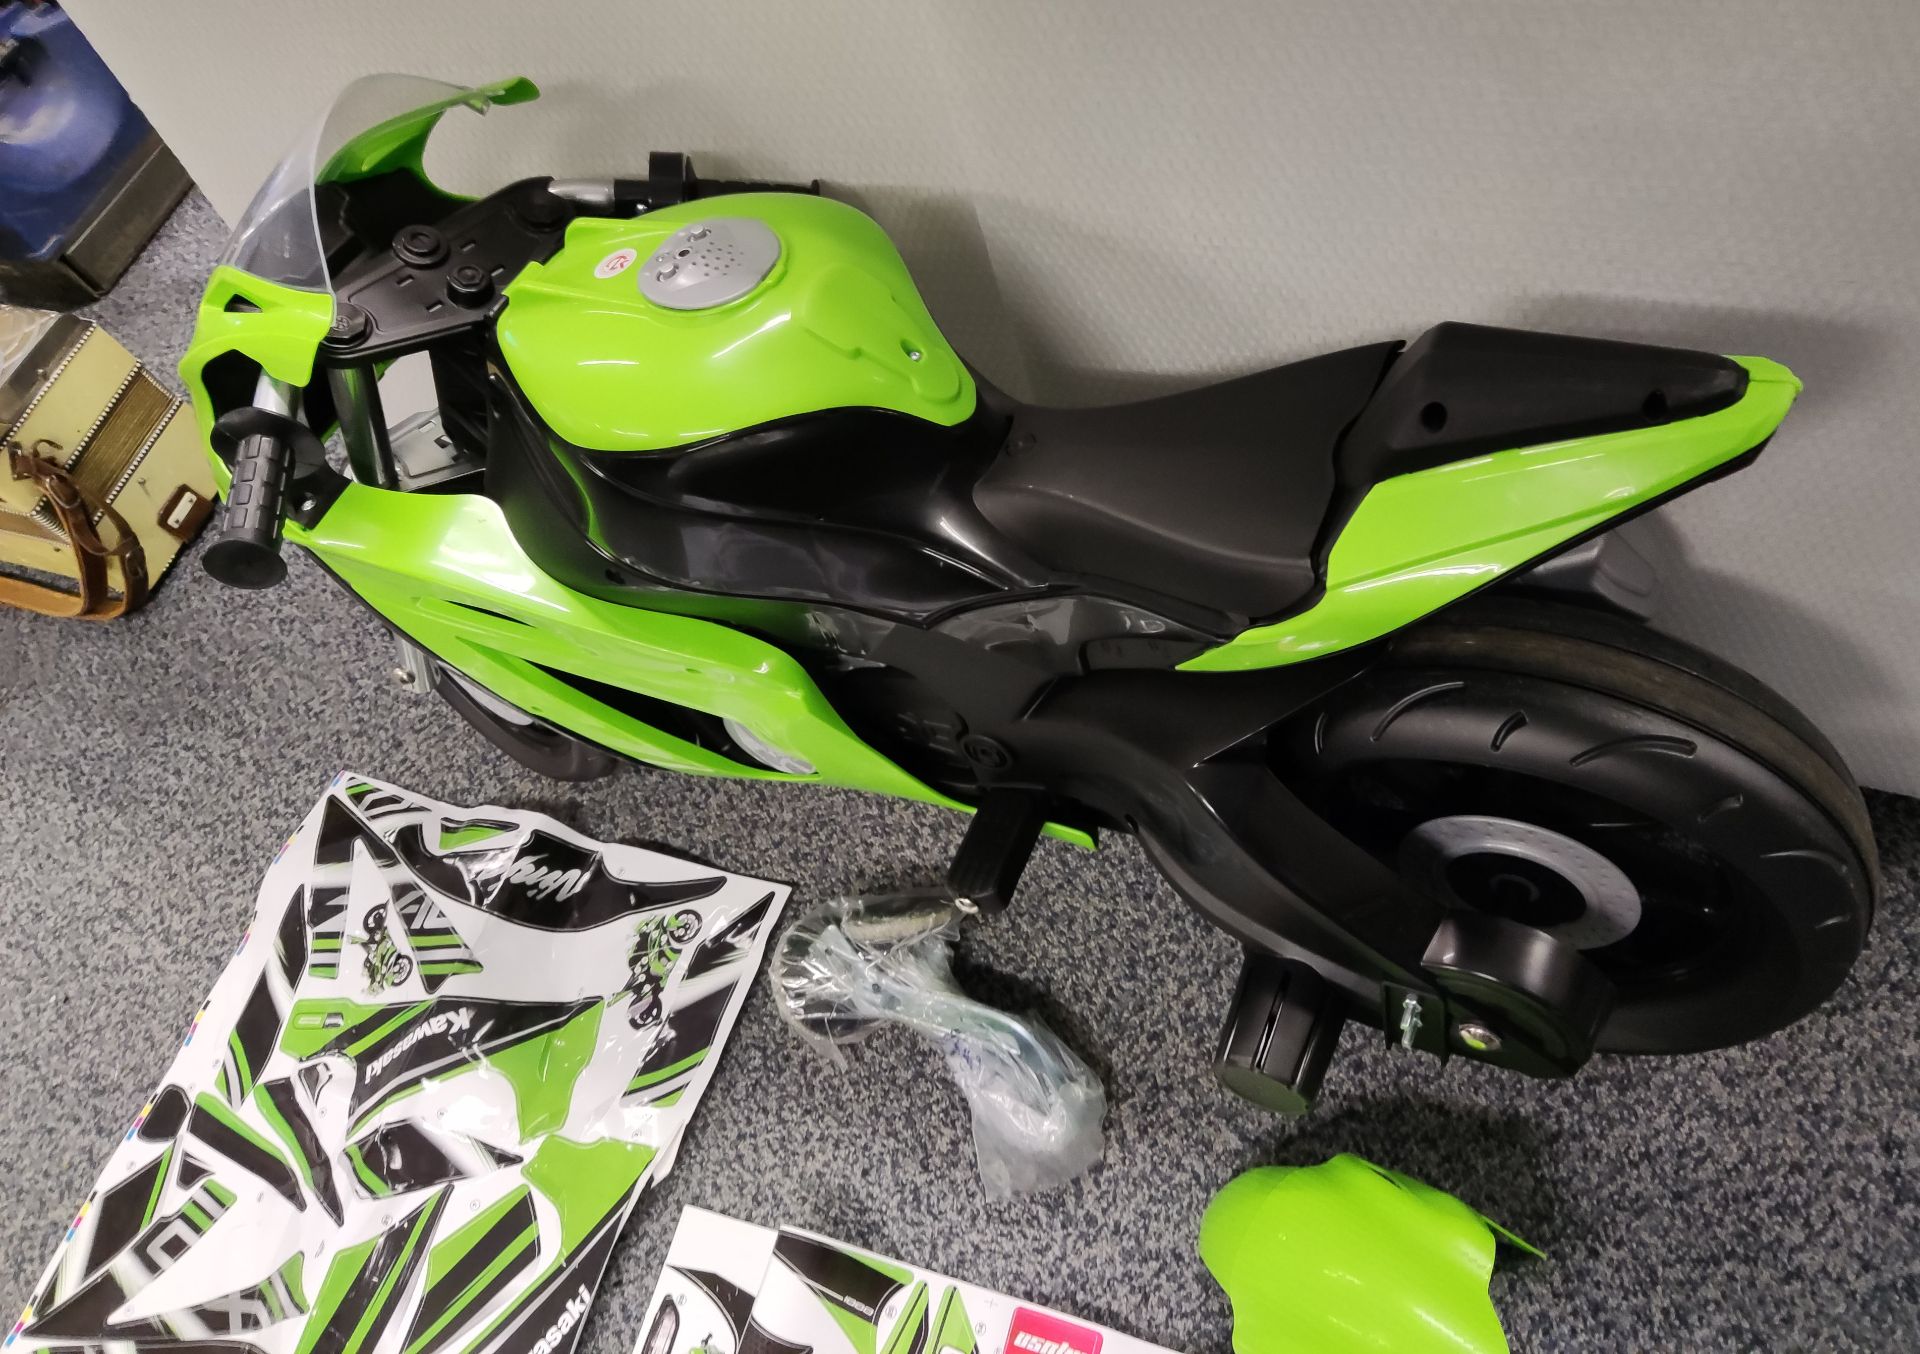 1 x Injusa Kids Electric Ride On Kawasaki ZX10 12V Motorcycle - 6495 - HTYS174 - CL987 - Location: - Image 12 of 24